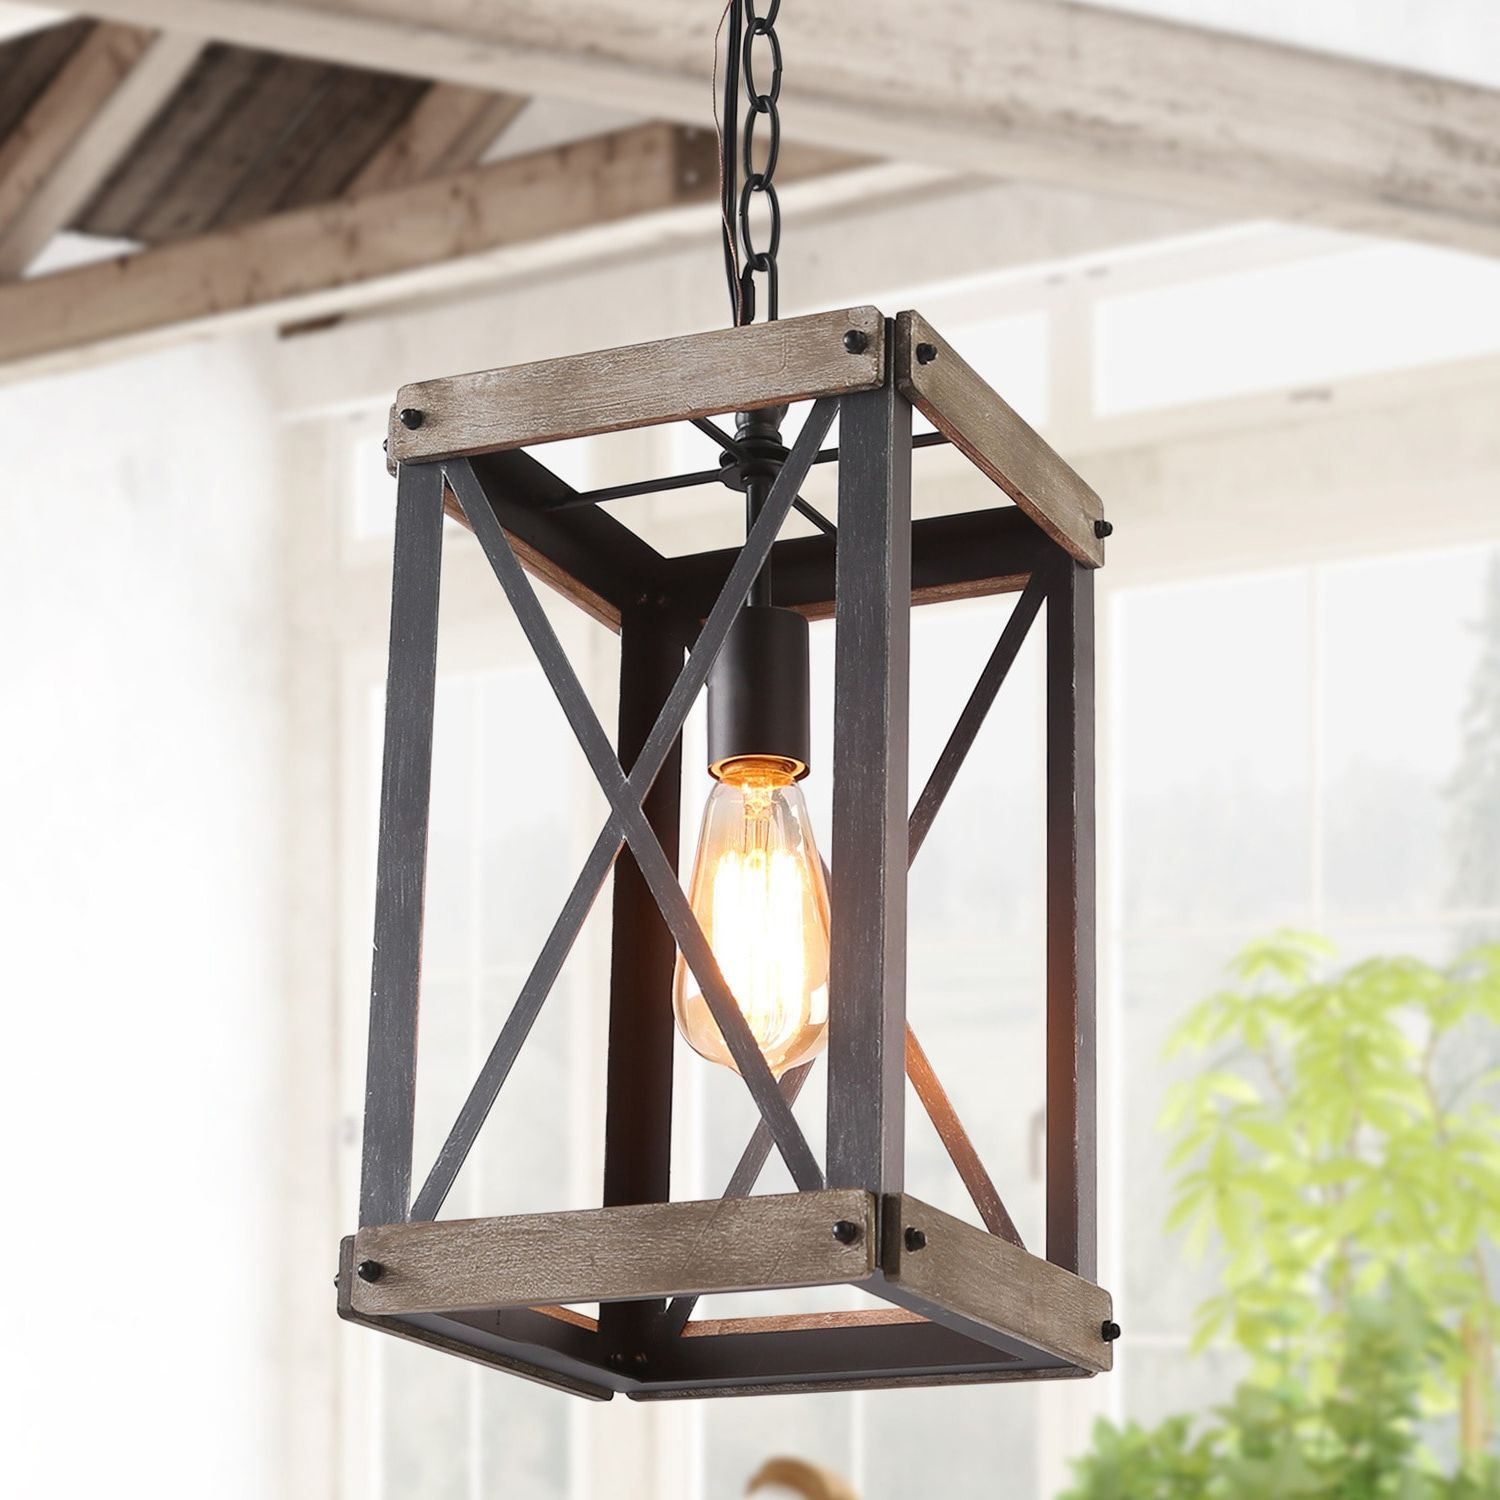 2020 Rustic Black Lantern Chandeliers With Regard To Lnc Laius Solid Pine Wood And Matte Black Farmhouse Lantern Led Mini  Kitchen Island Light In The Pendant Lighting Department At Lowes (View 9 of 10)